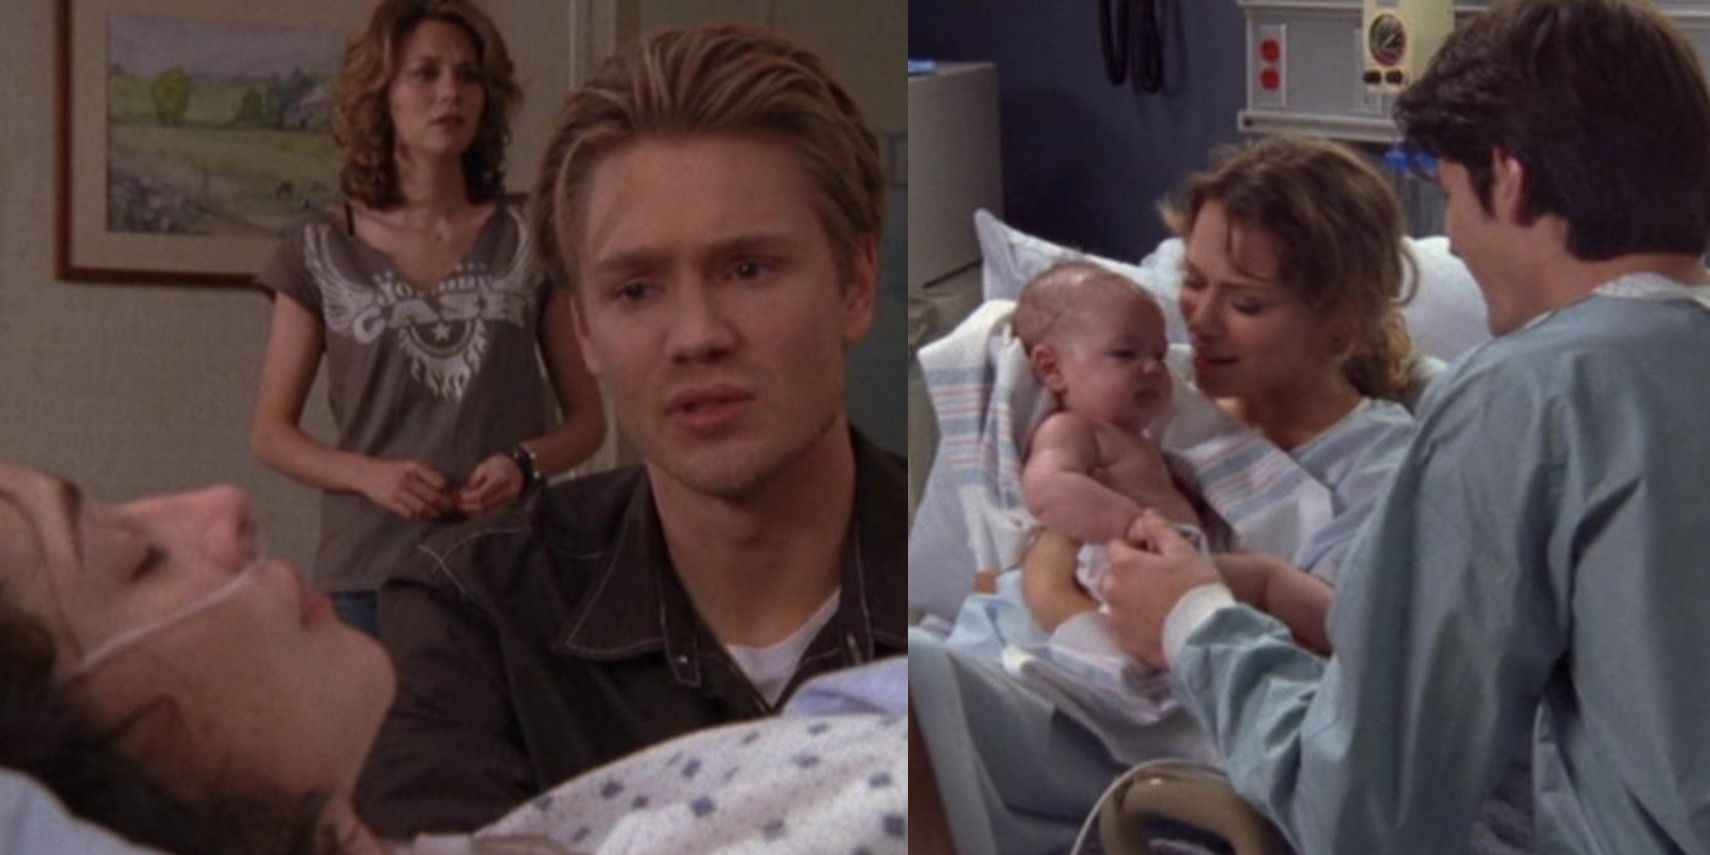 Lucas Scott (Chad Michael Murray) looking at his mom in the hospital; Nathan Scott (James Lafferty) and Haley James Scott (Bethany Joy Lenz) looking at their newborn son in &quot;One Tree Hill.&quot;